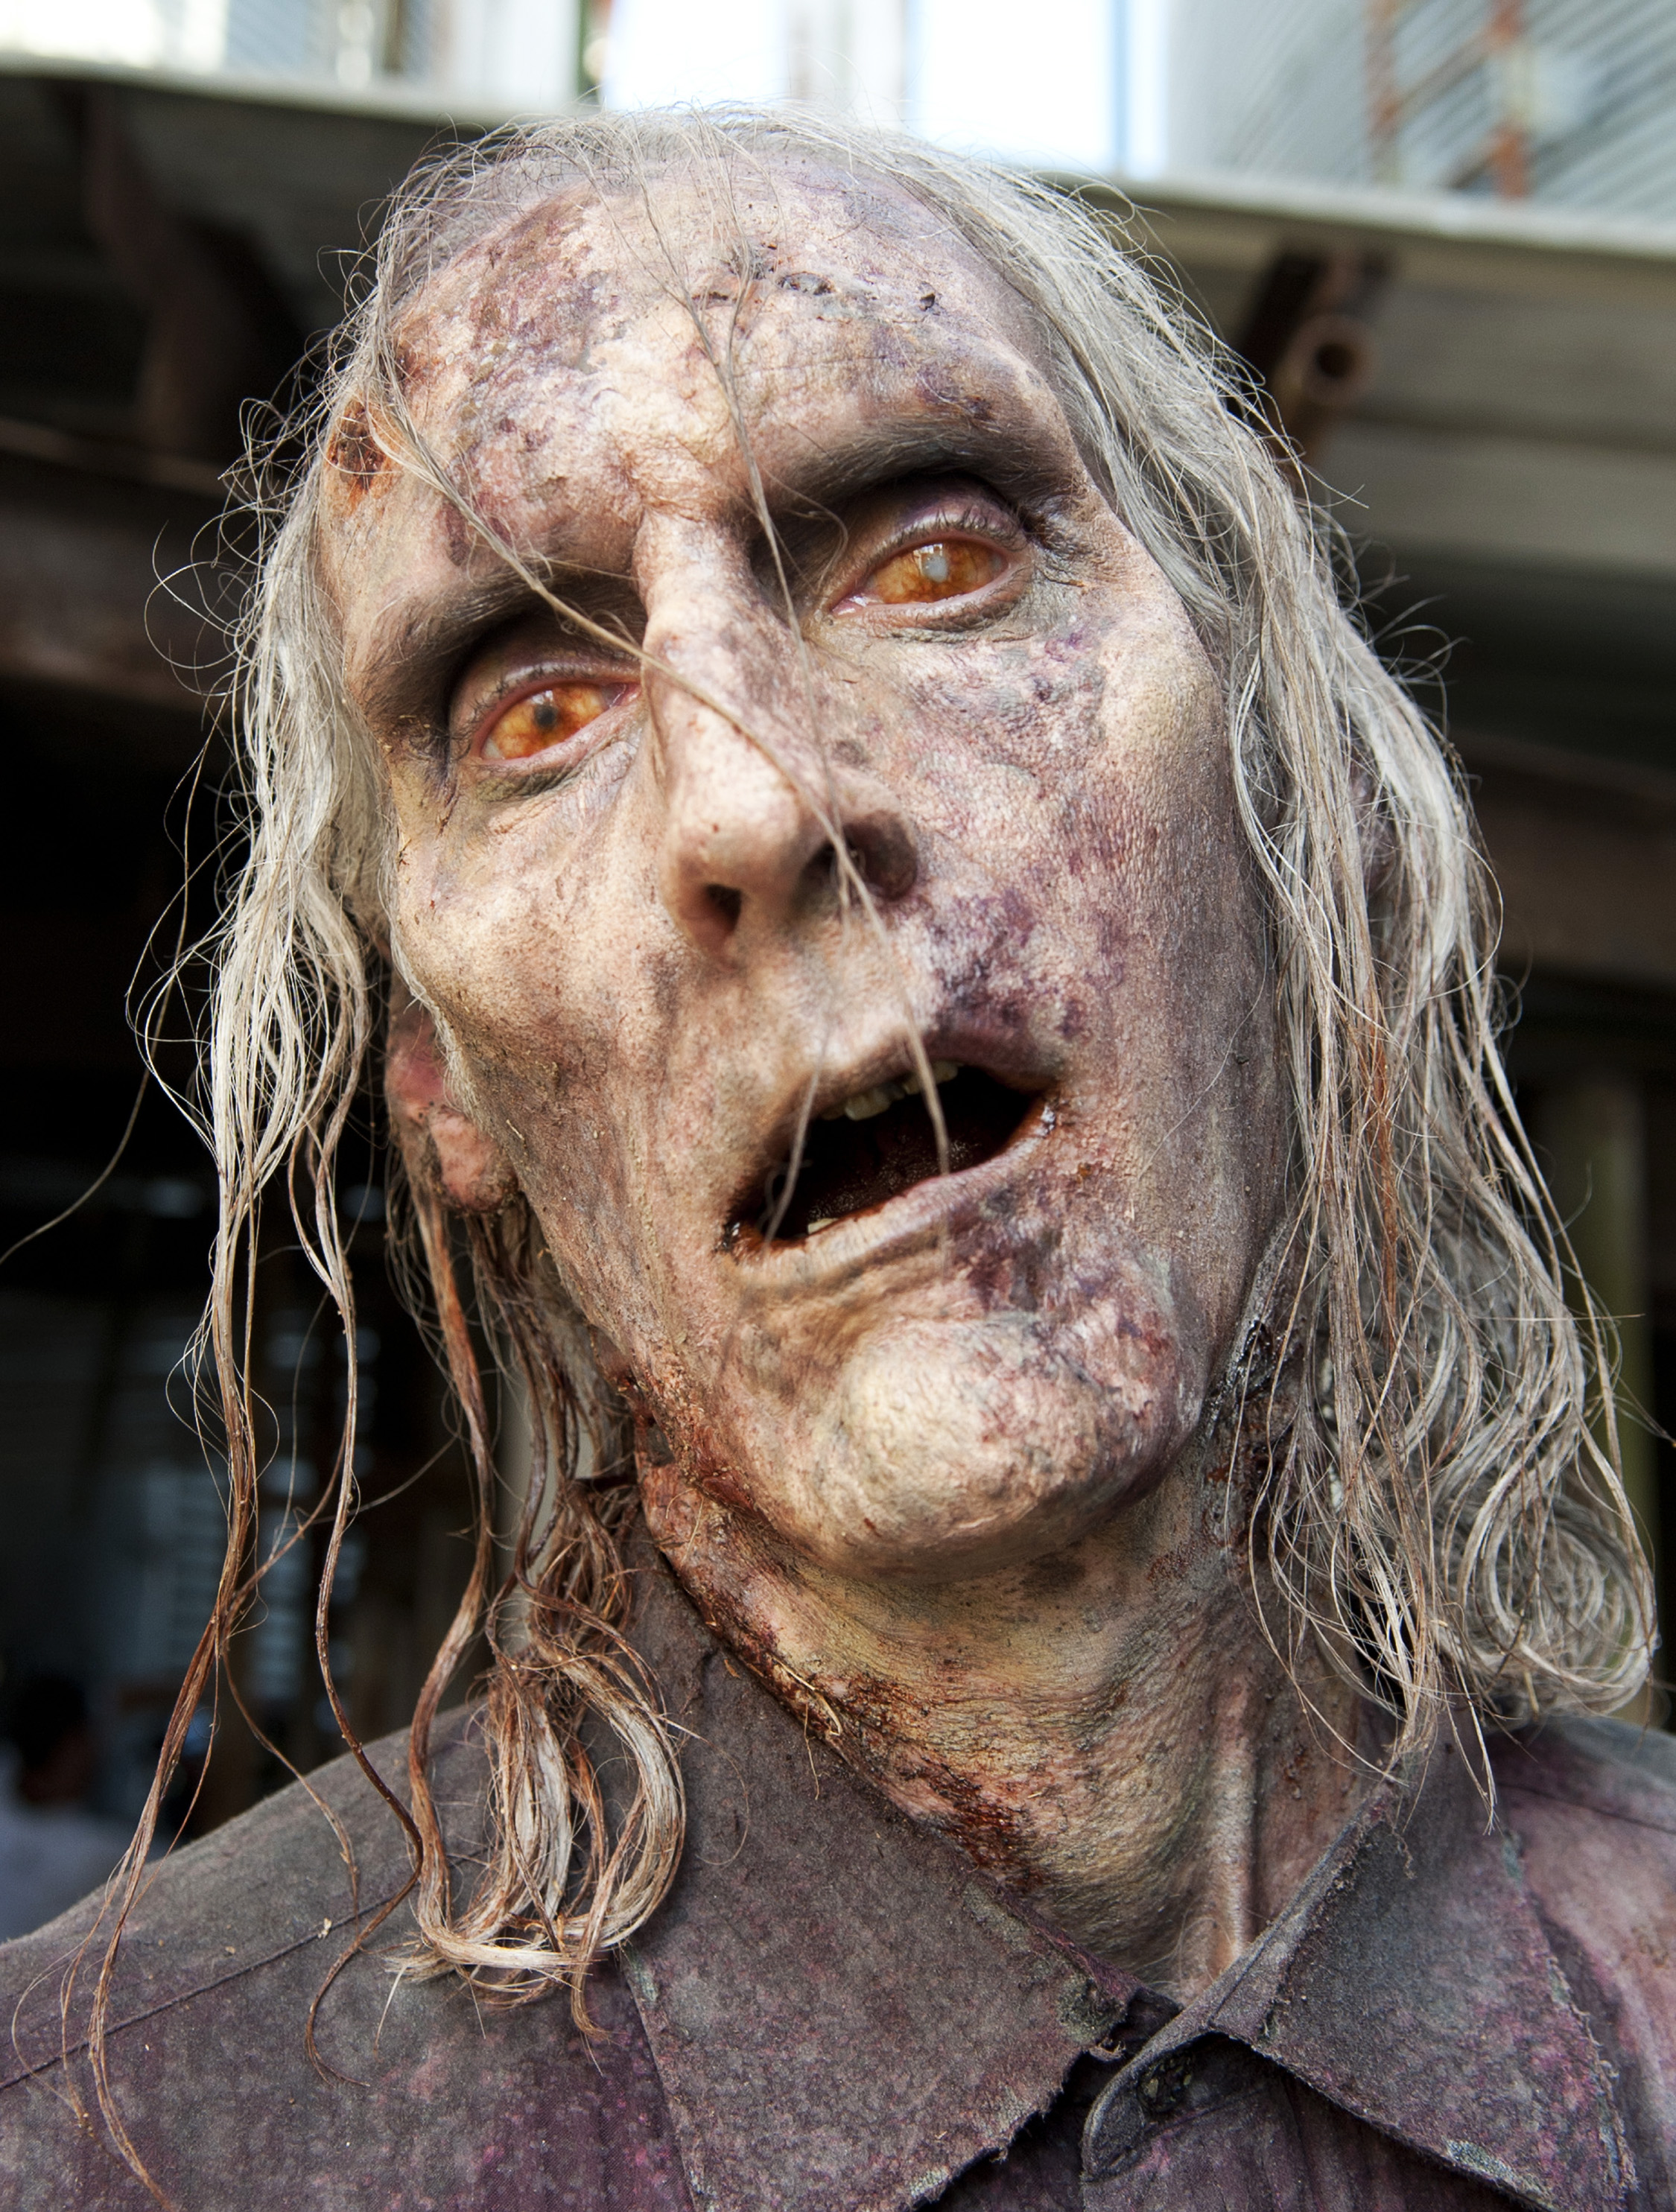 A still photo from The Walking Dead episode 3:13 